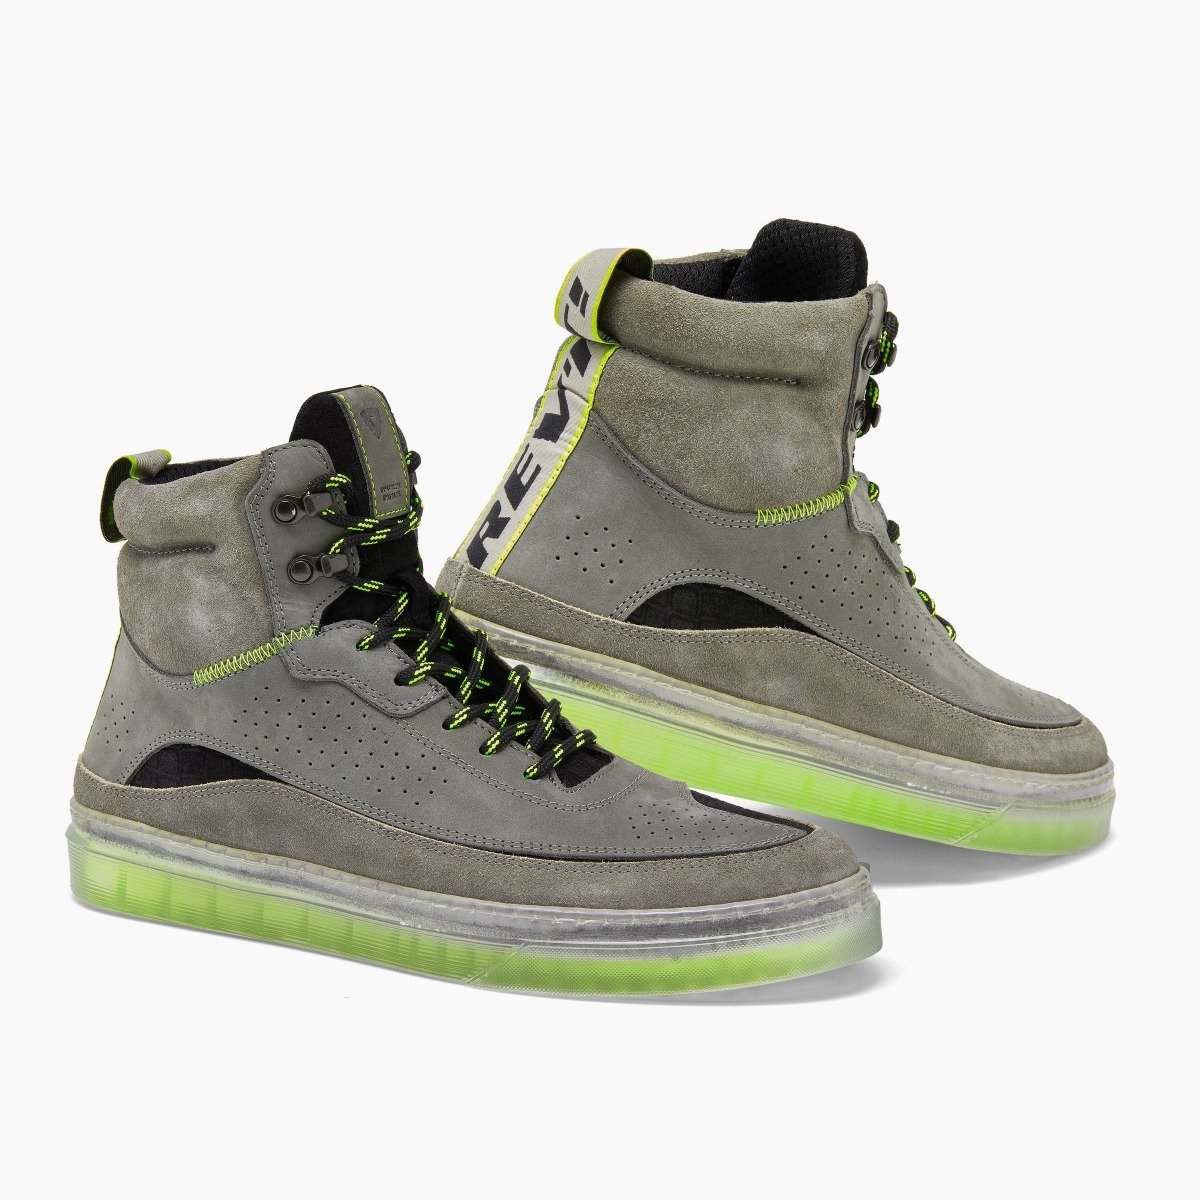 Image of REV'IT! Filter Gray Neon Yellow Motorcycle Shoes Size 45 EN